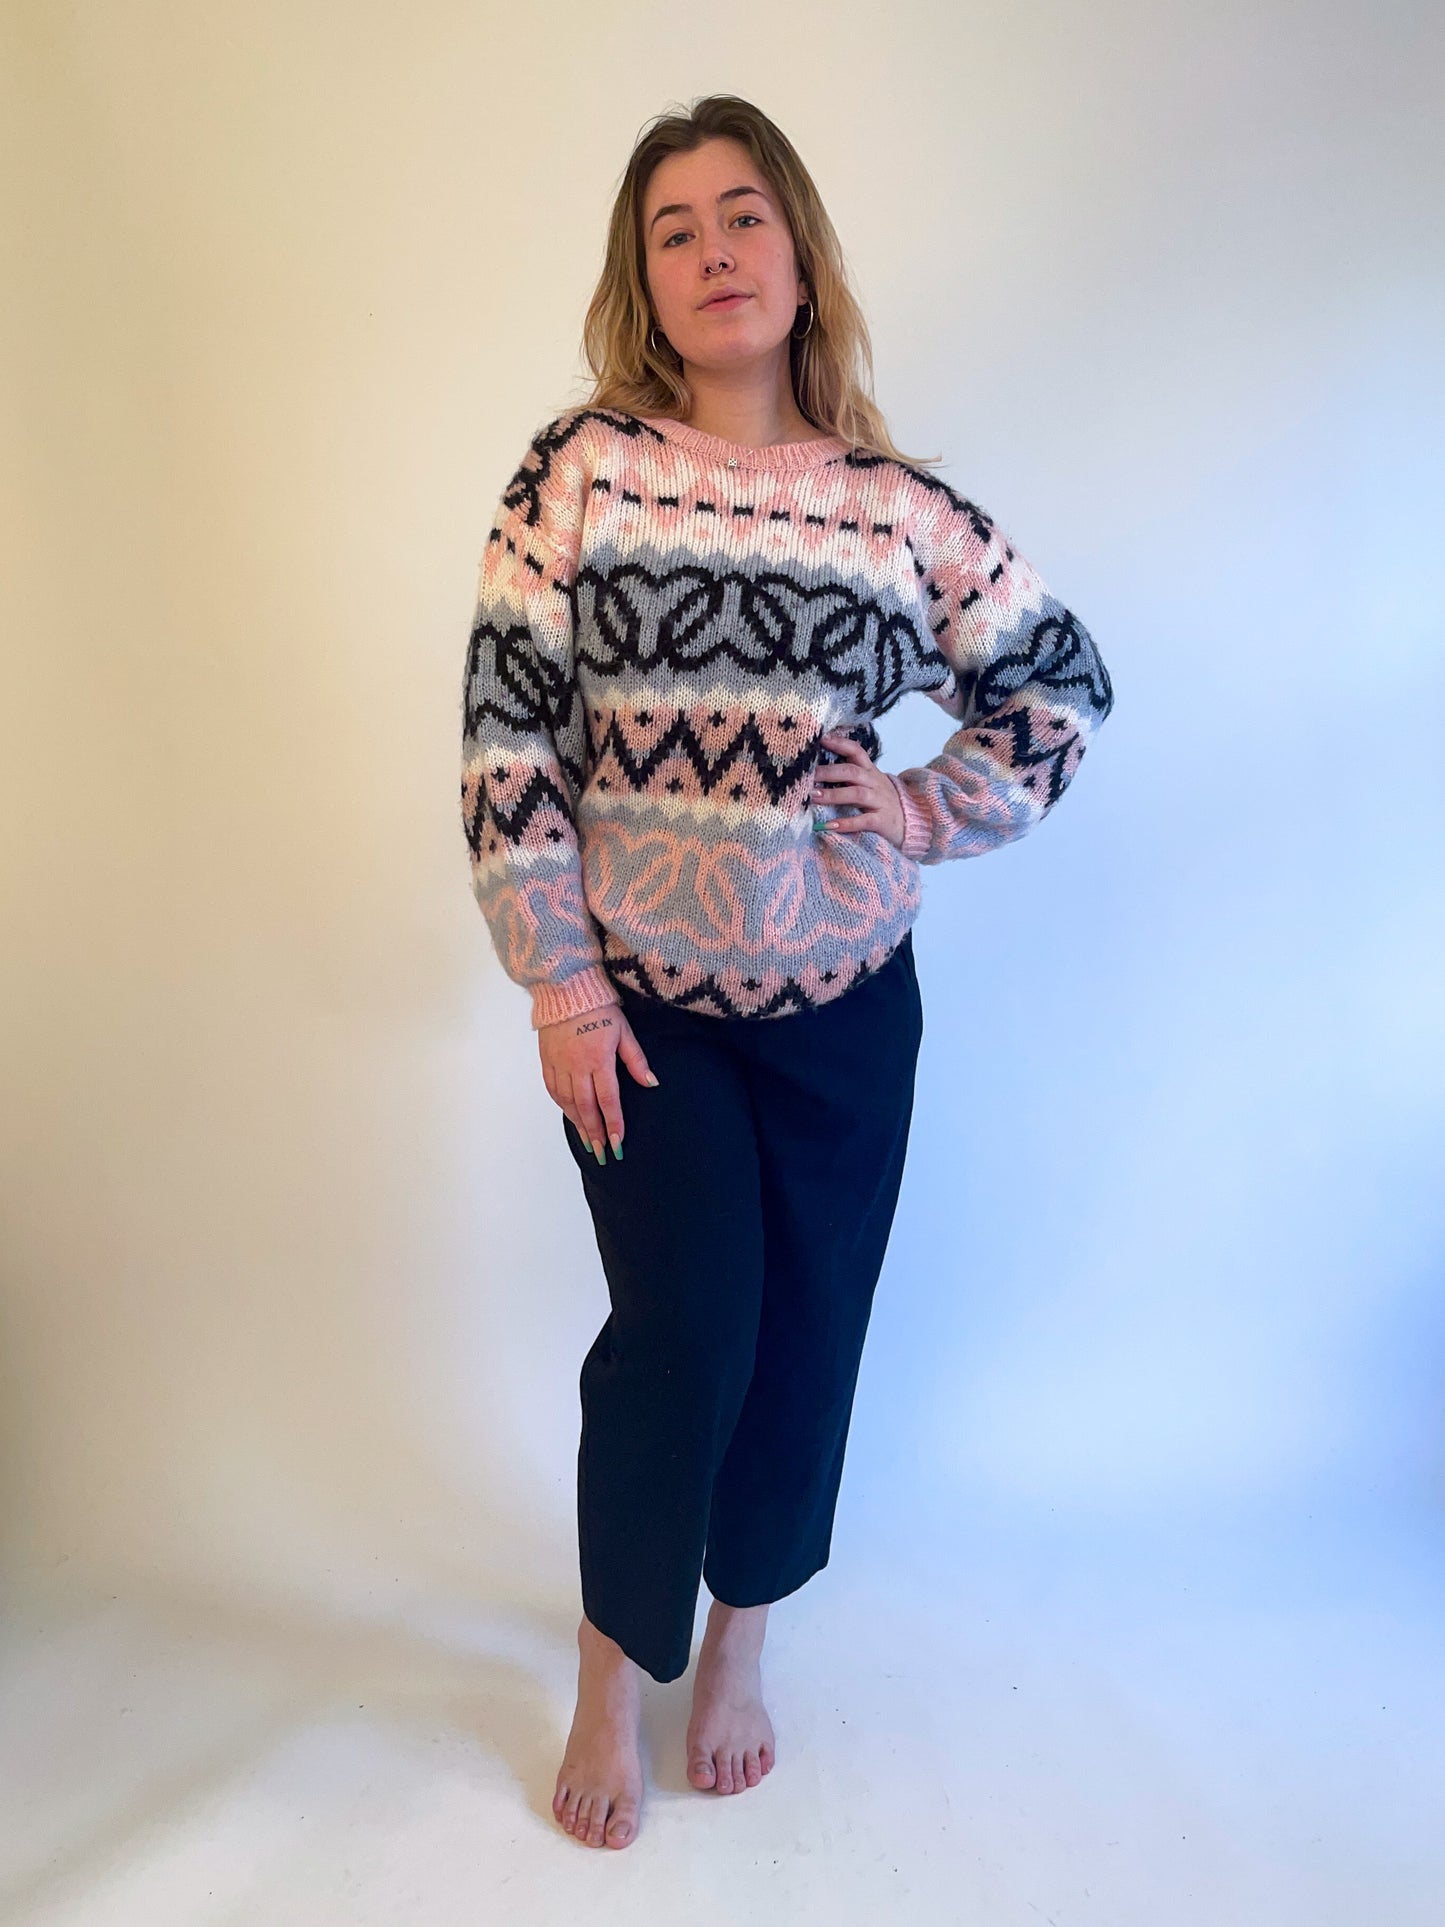 L 80s Chunky Knit Heart Patterned Sweater